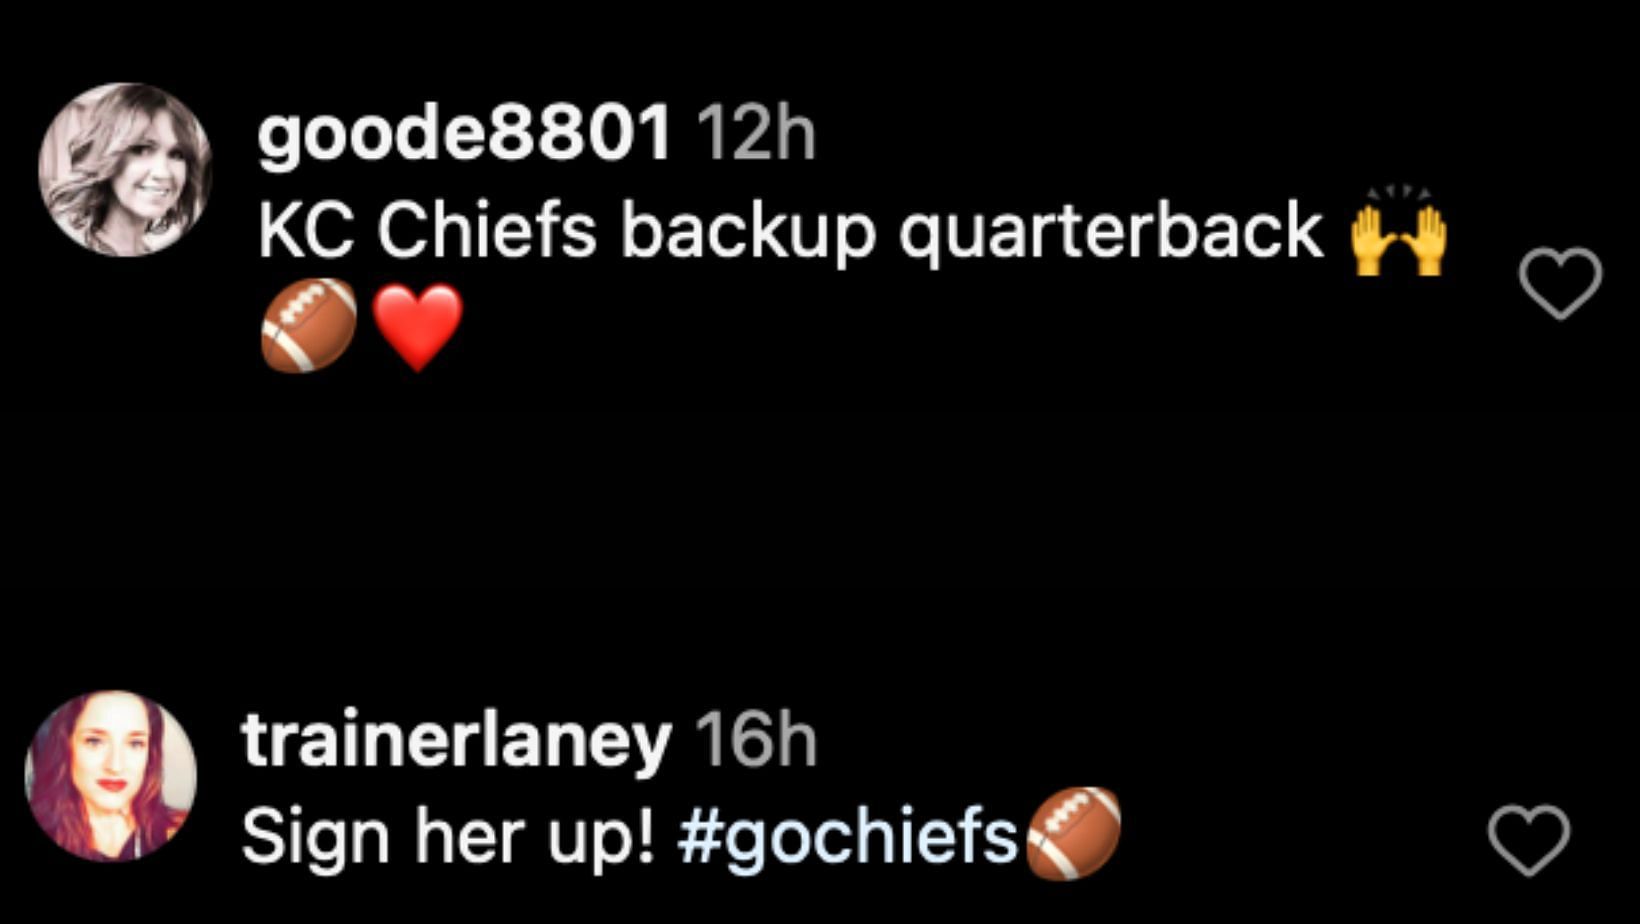 Fans urging the Chiefs to sign Mia Mahomes. Credit: @randimahomes (IG)